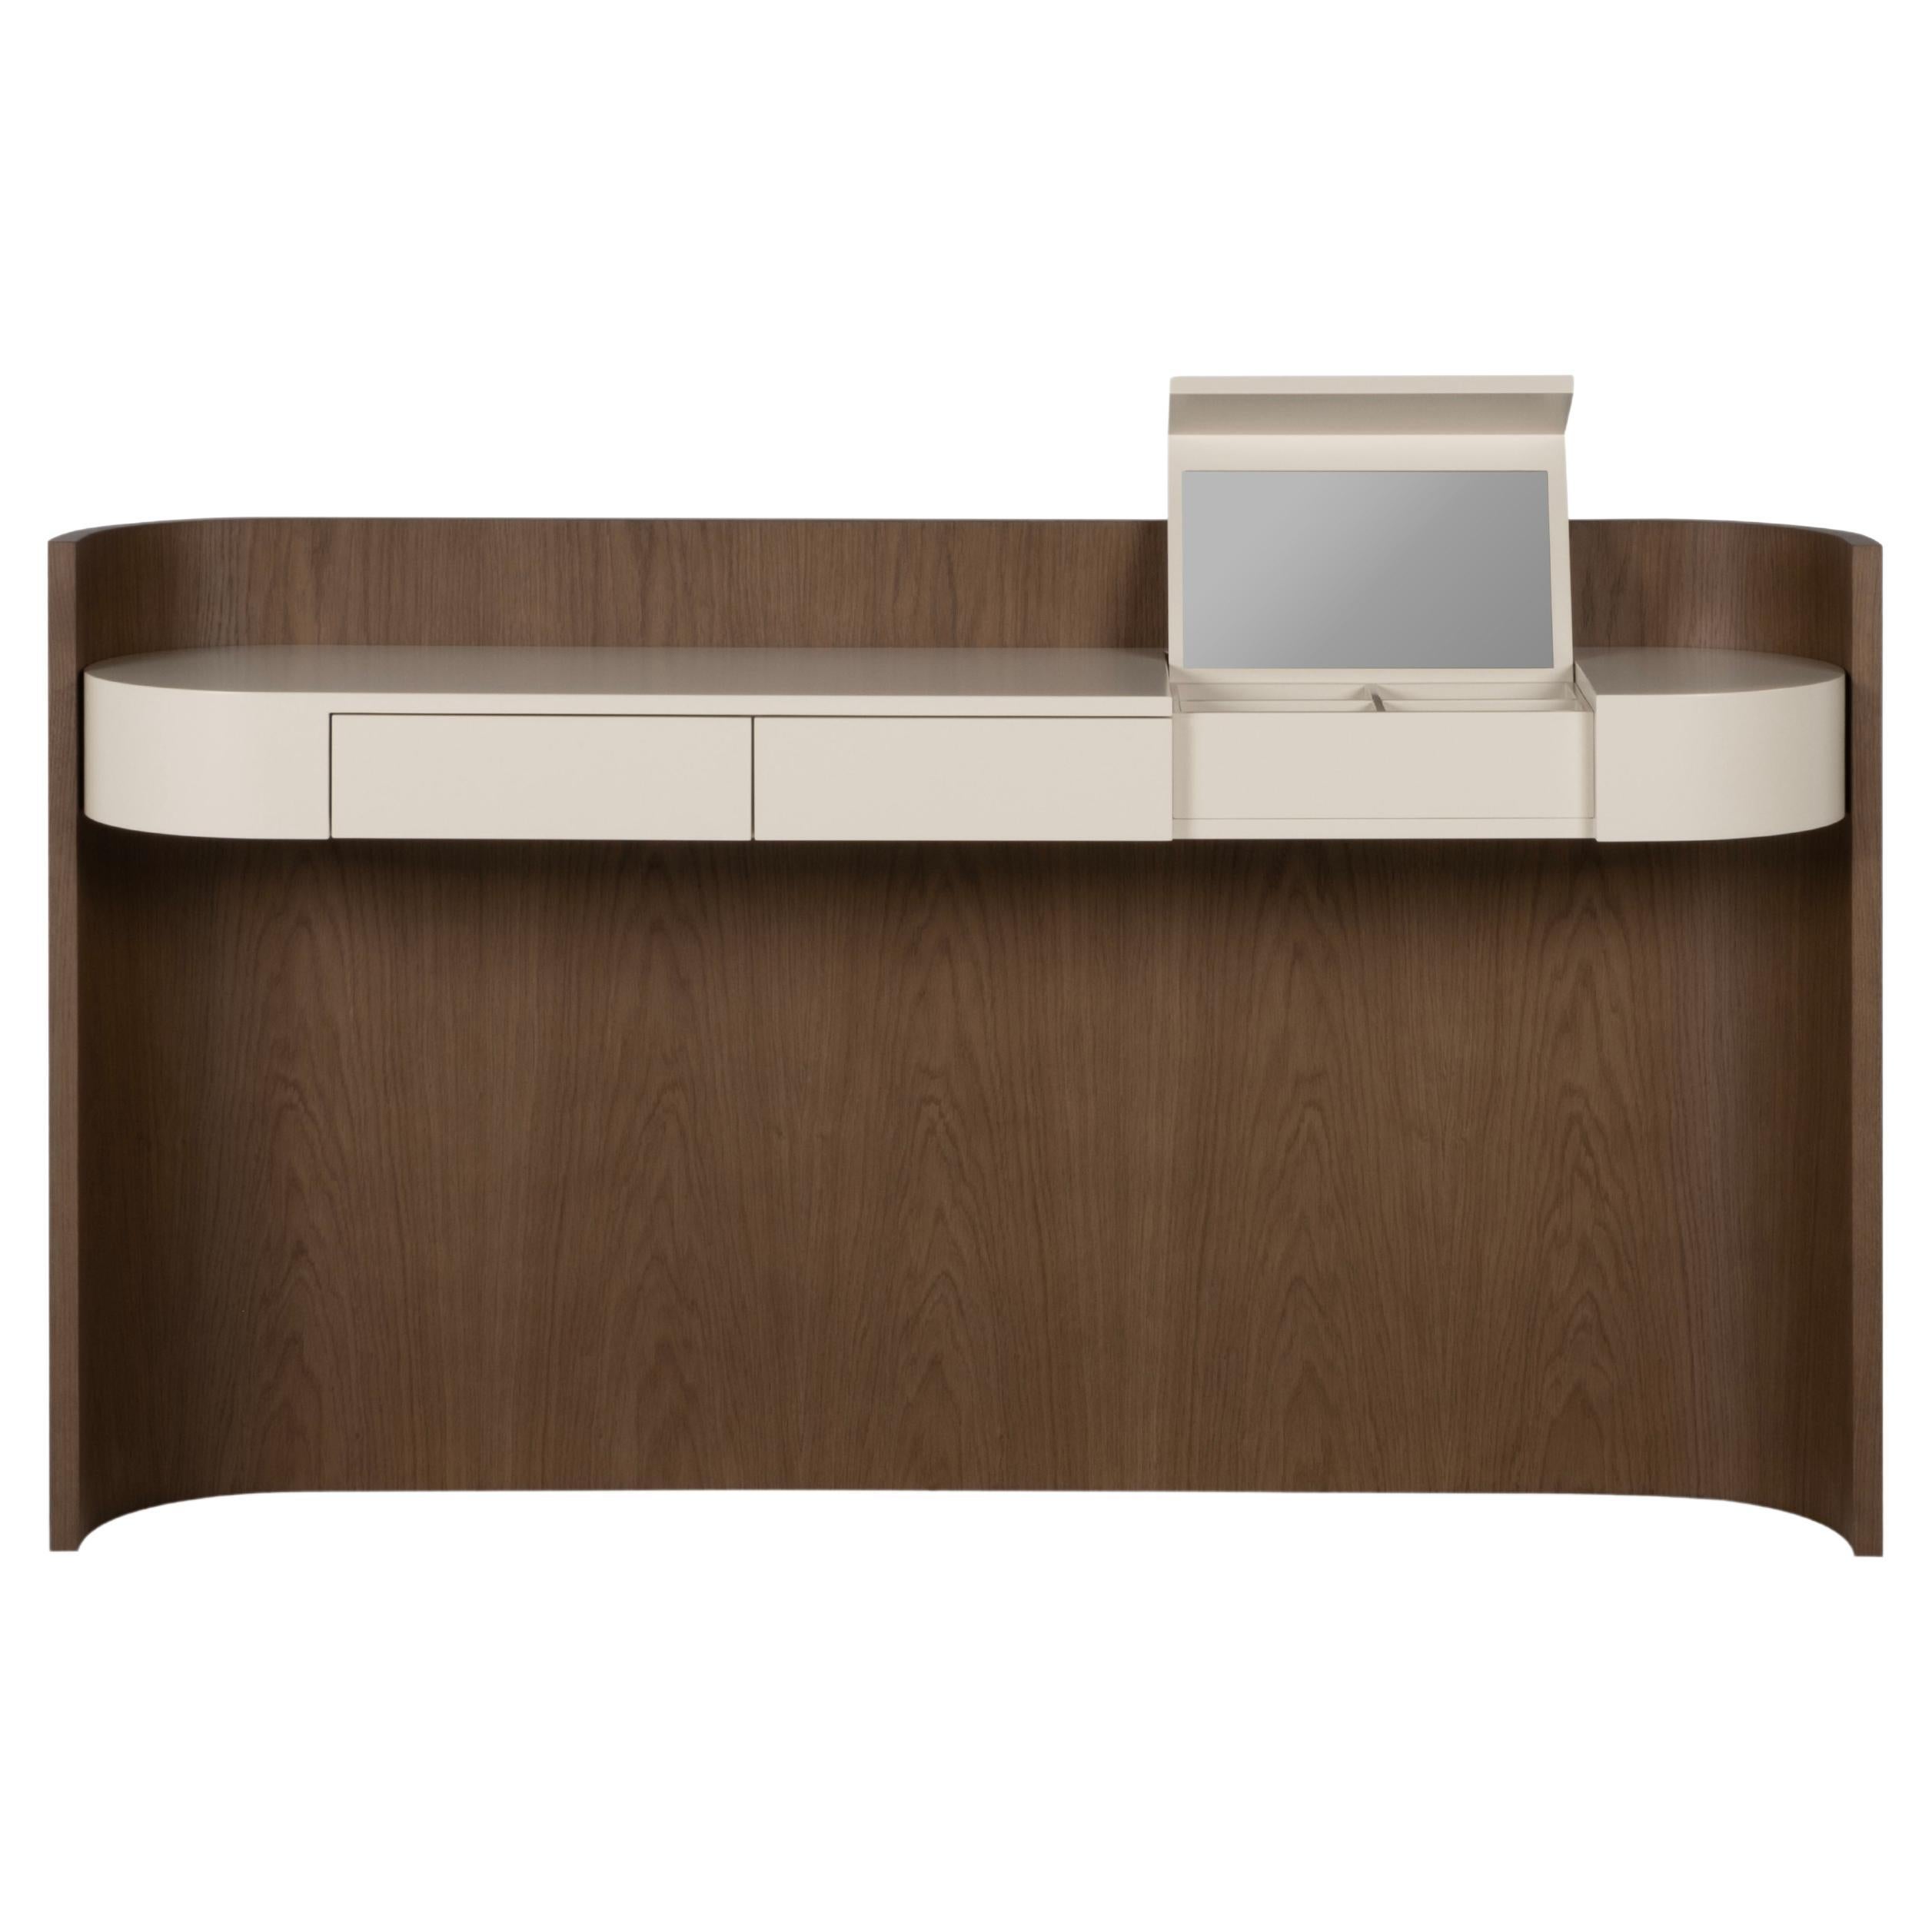 Toscana Vanity Table, Contemporary Collection, Handcrafted in Portugal - Europe by Greenapple.

The organic modern Toscana vanity table is a captivating blend of natural beauty and contemporary design, where true freedom of movement allows the